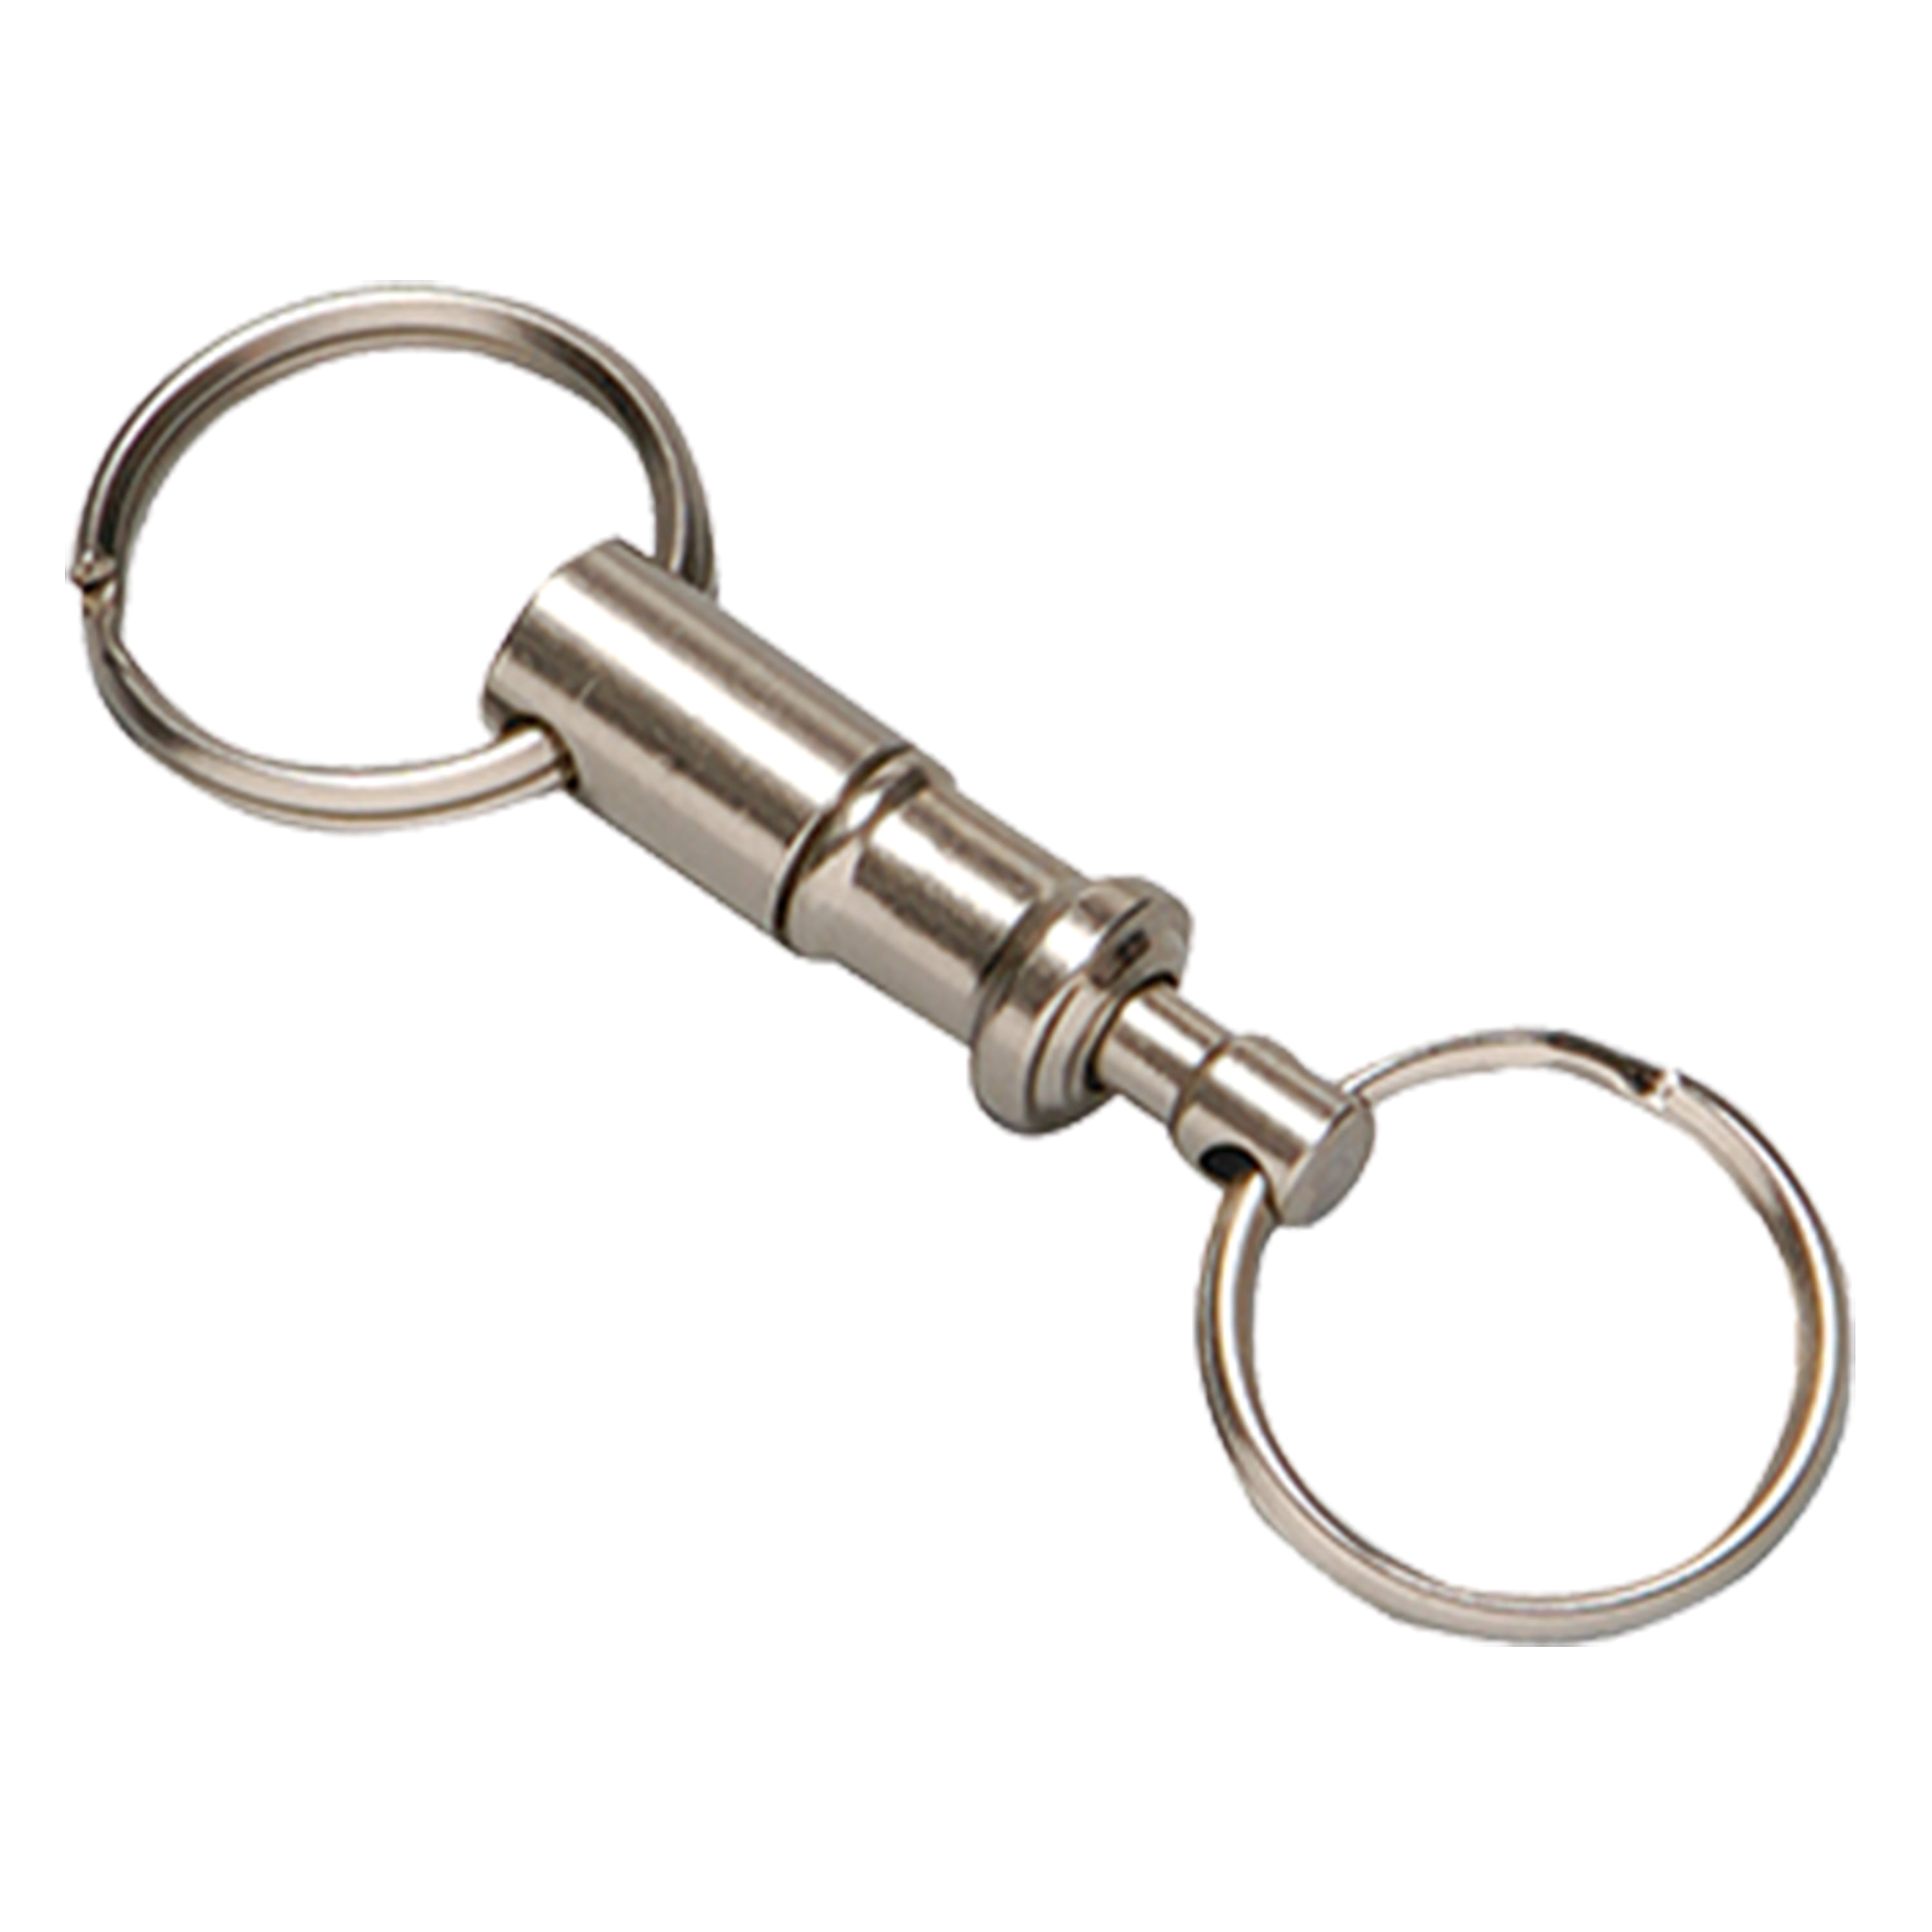 Hy-Ko Key Ring C-Clip, 2.5, Assorted Colors